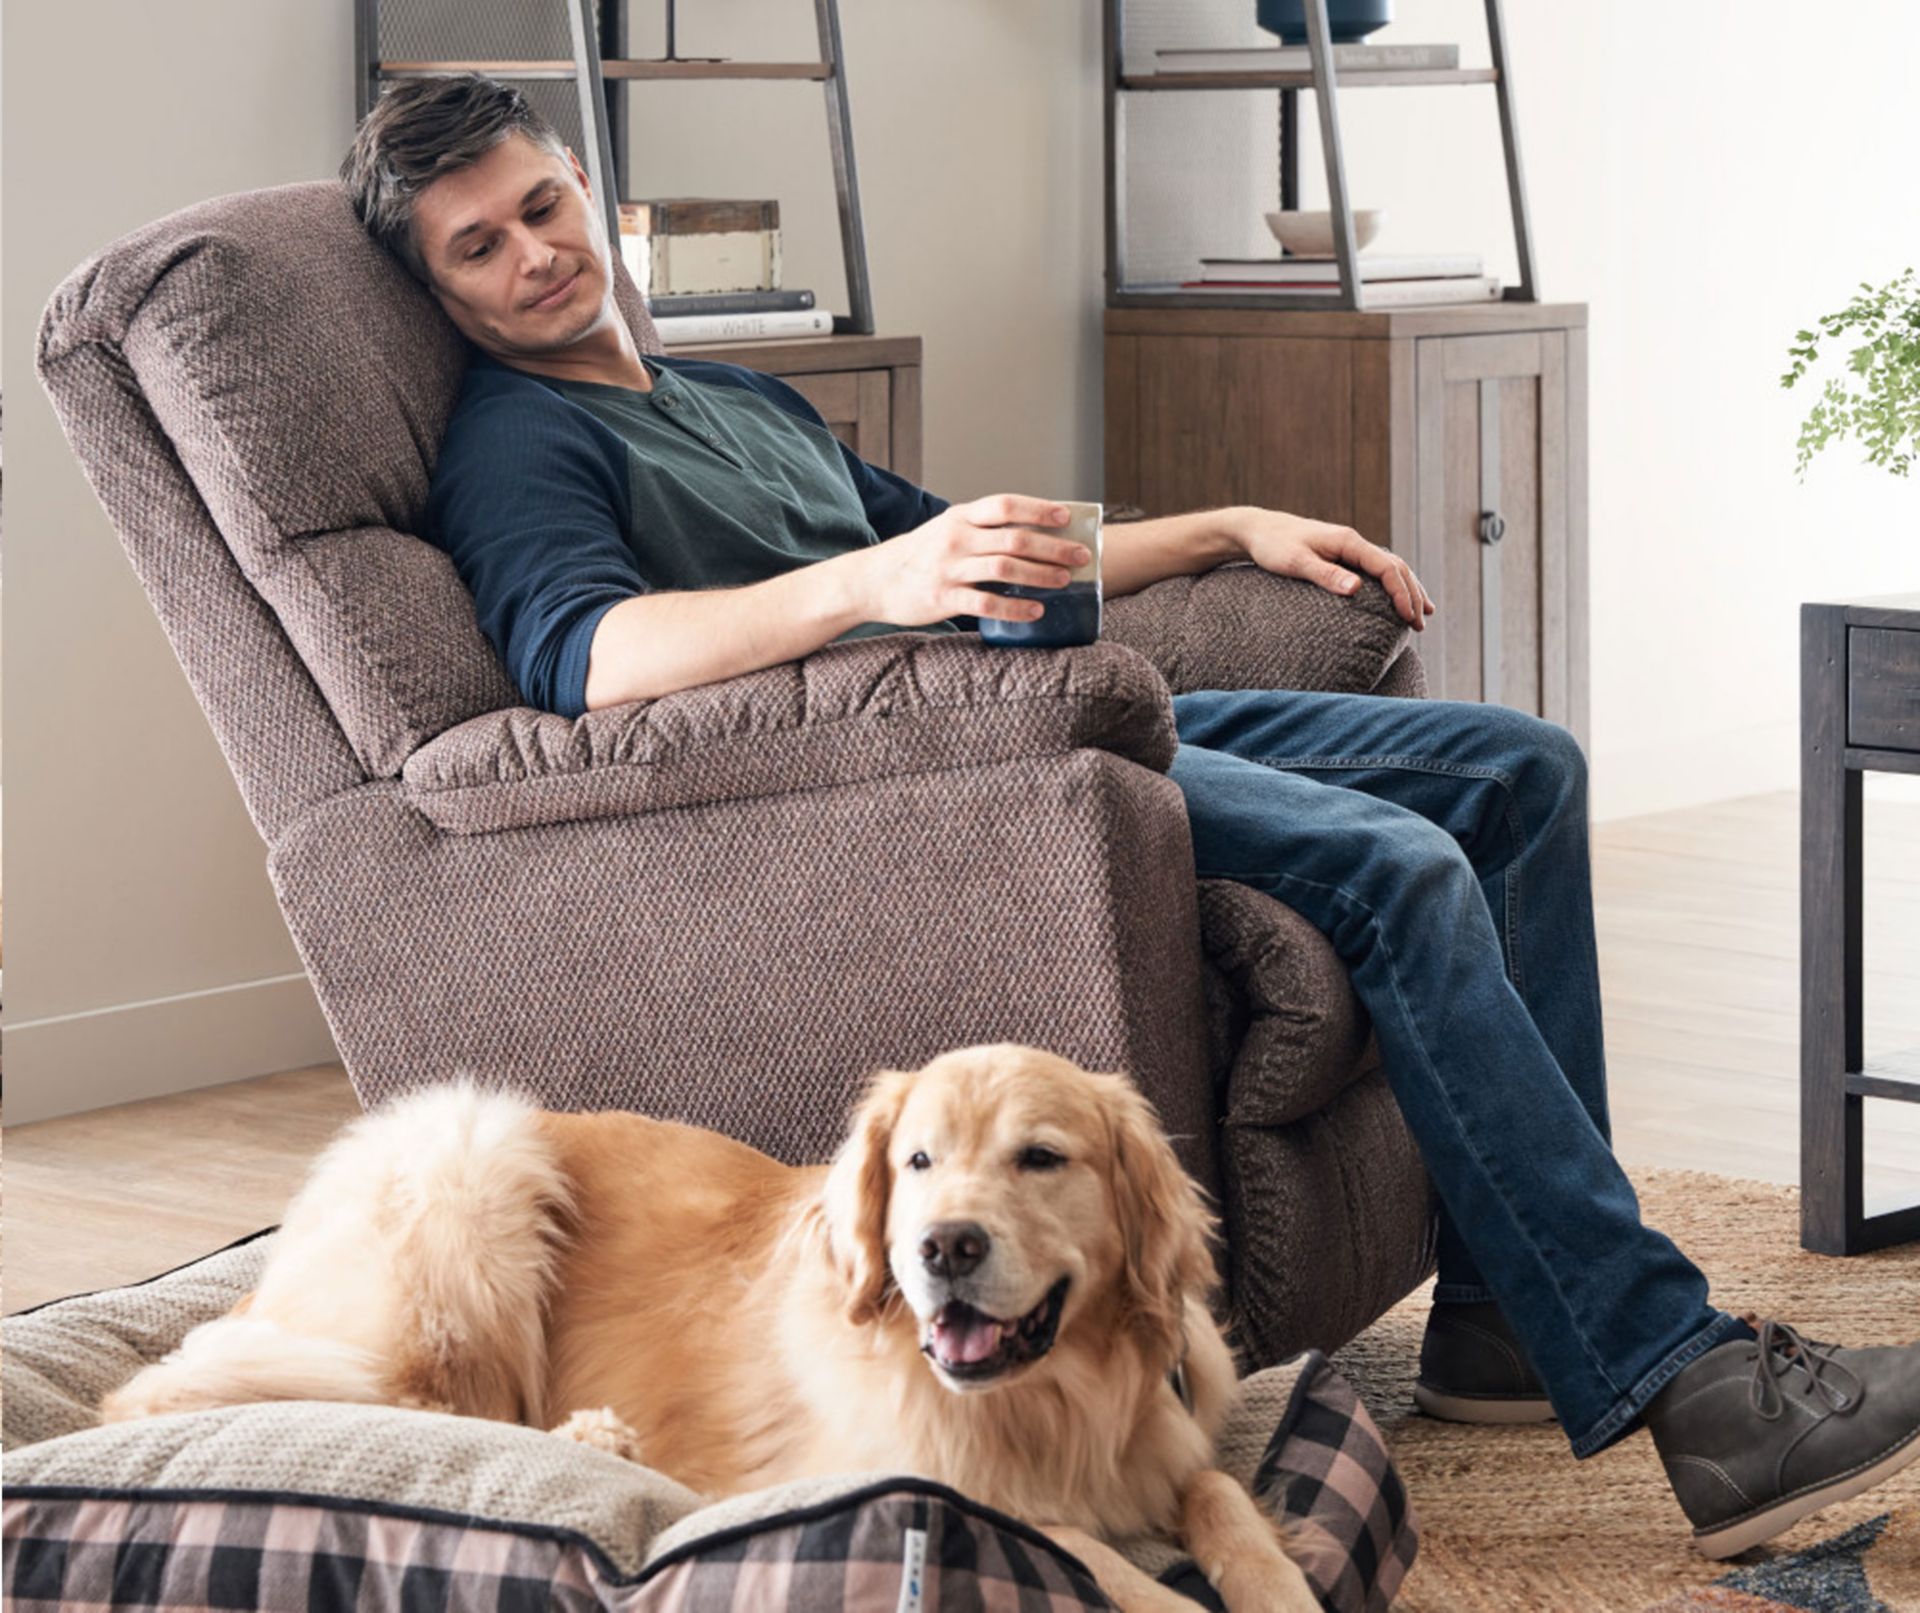 Man Reclining in Morrison Chair by LaZboy with his Golden Retriever sitting next to him